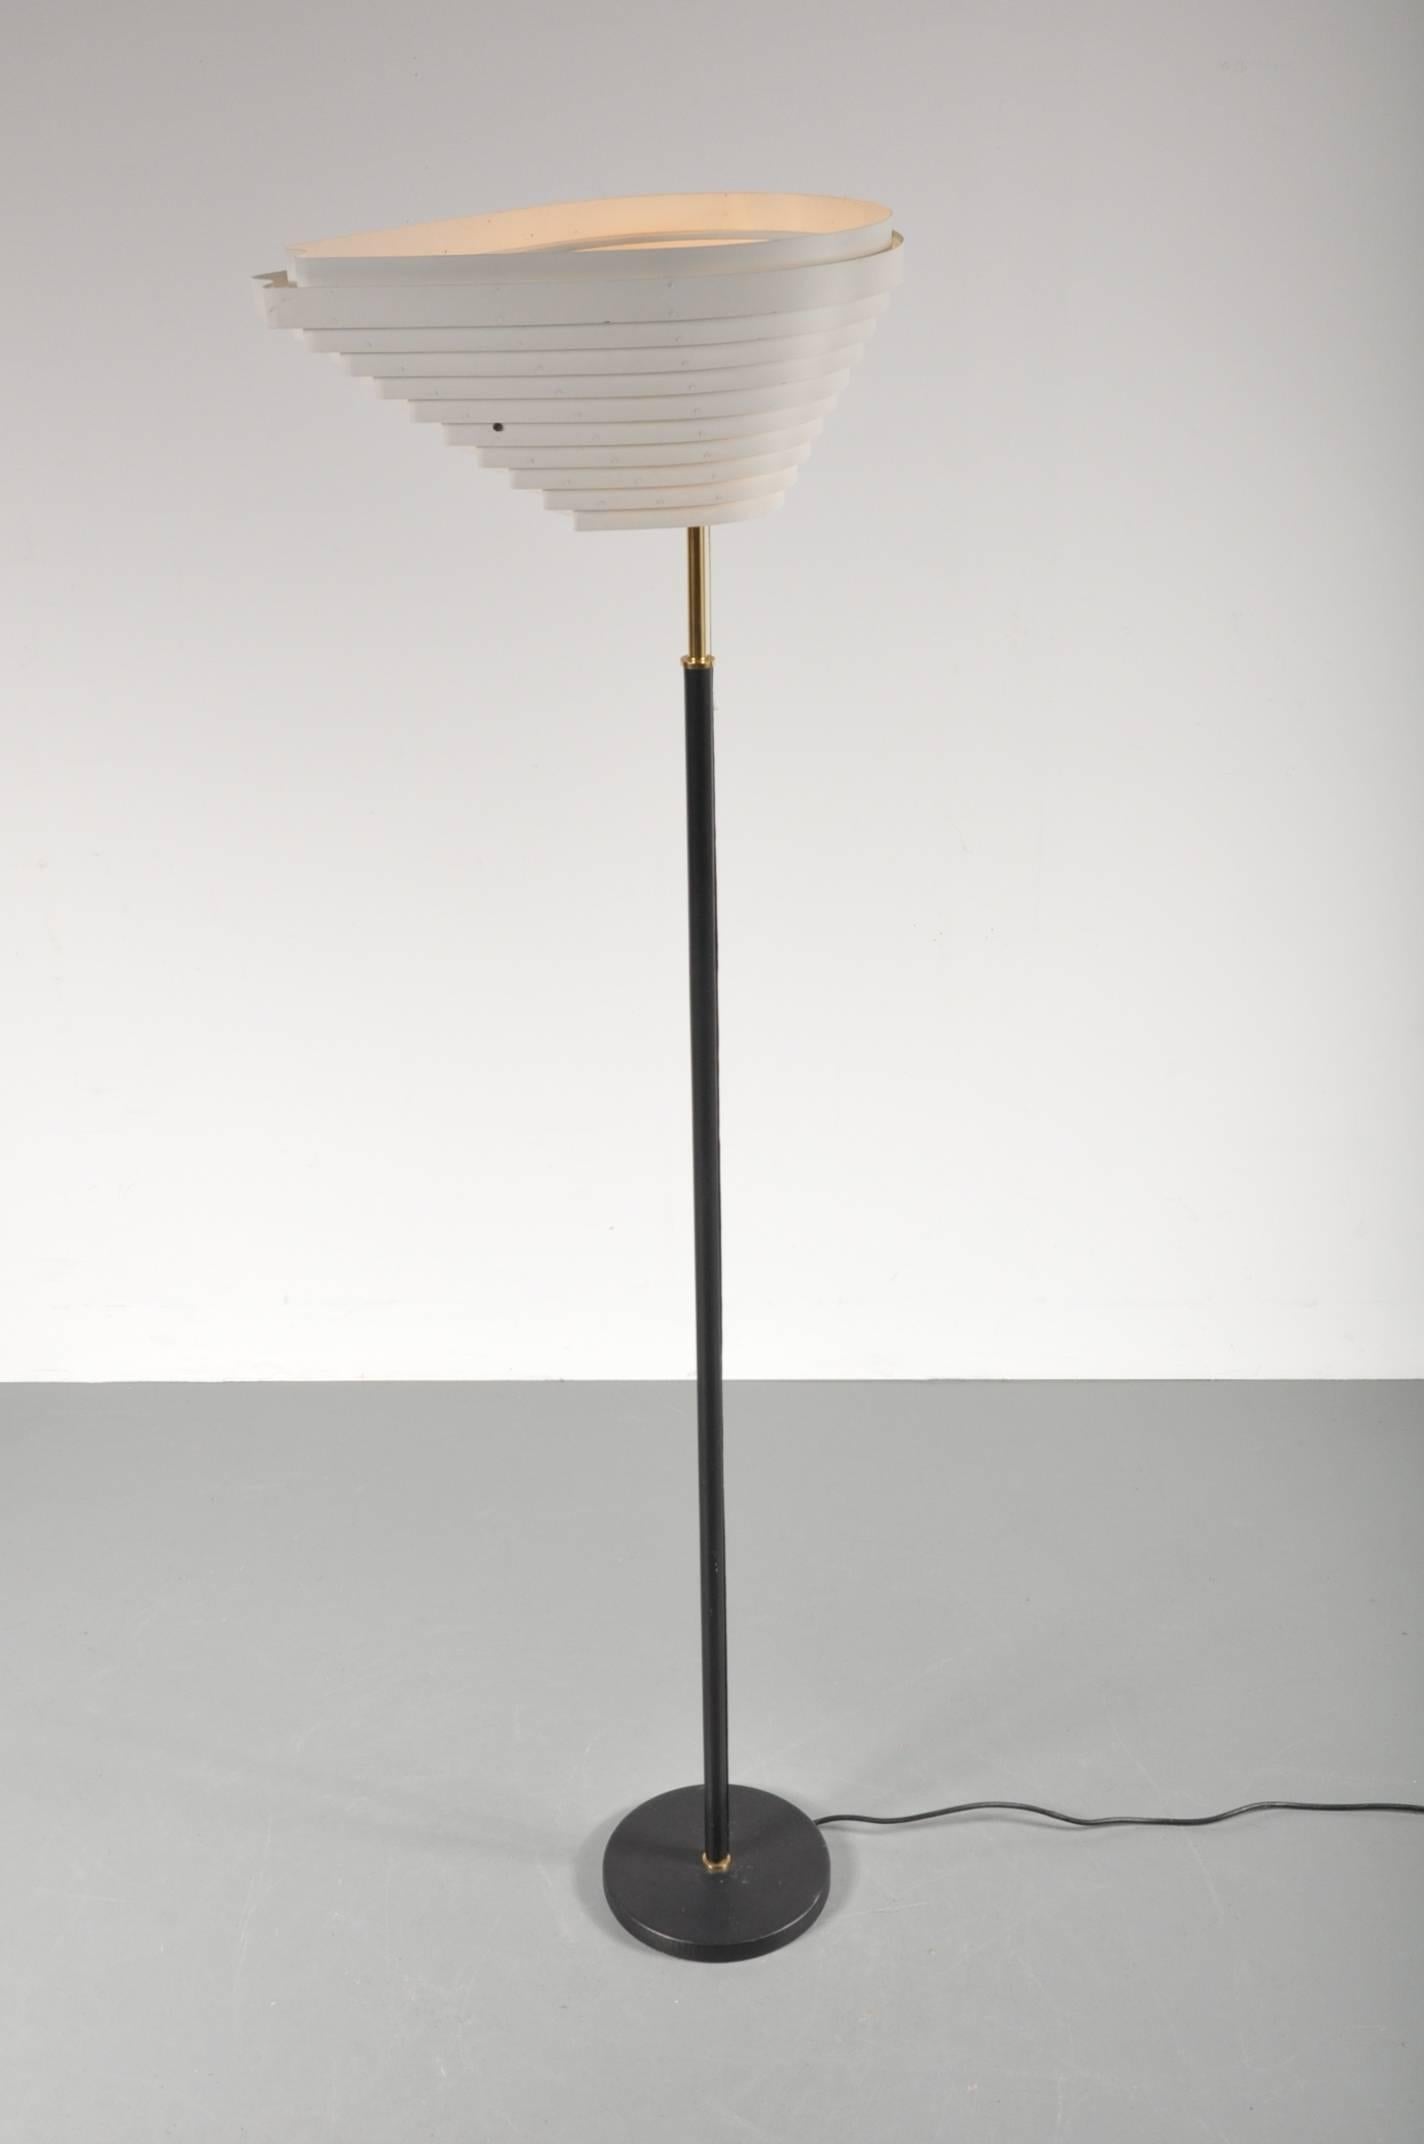 Iconic floor lamp by famous Finish designer Alvar Aalto, manufactured by Artek in Finland, in 1956.

This unique design was originally made for Helsinki's Social Insurance Institution Building in 1955. The eye-catching shape of the hood gave it the